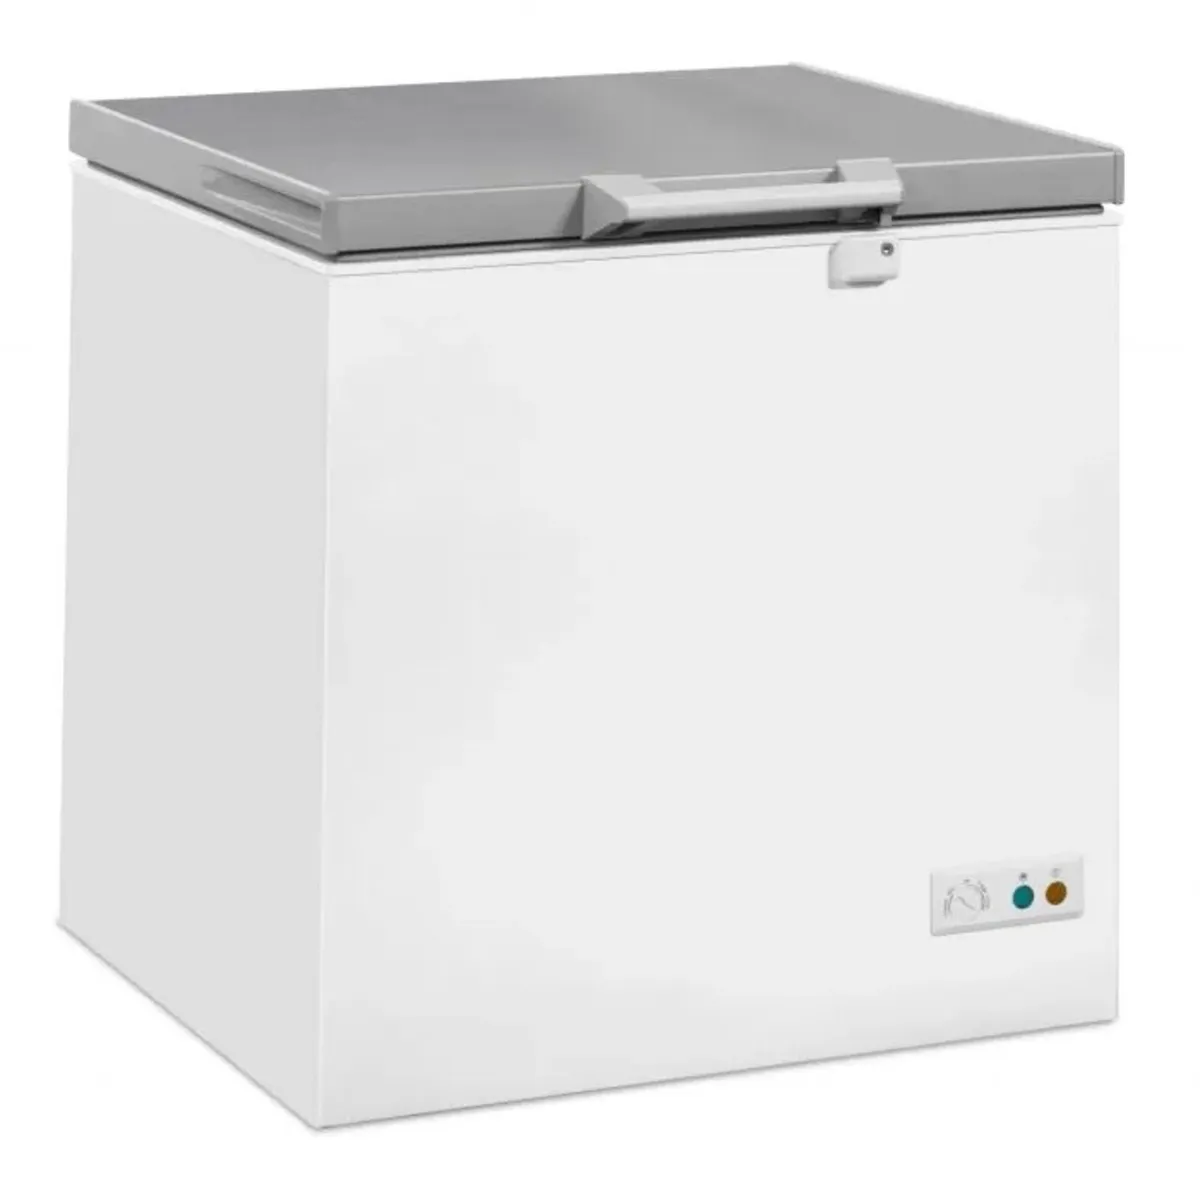 New commercial chest freezers - Image 1